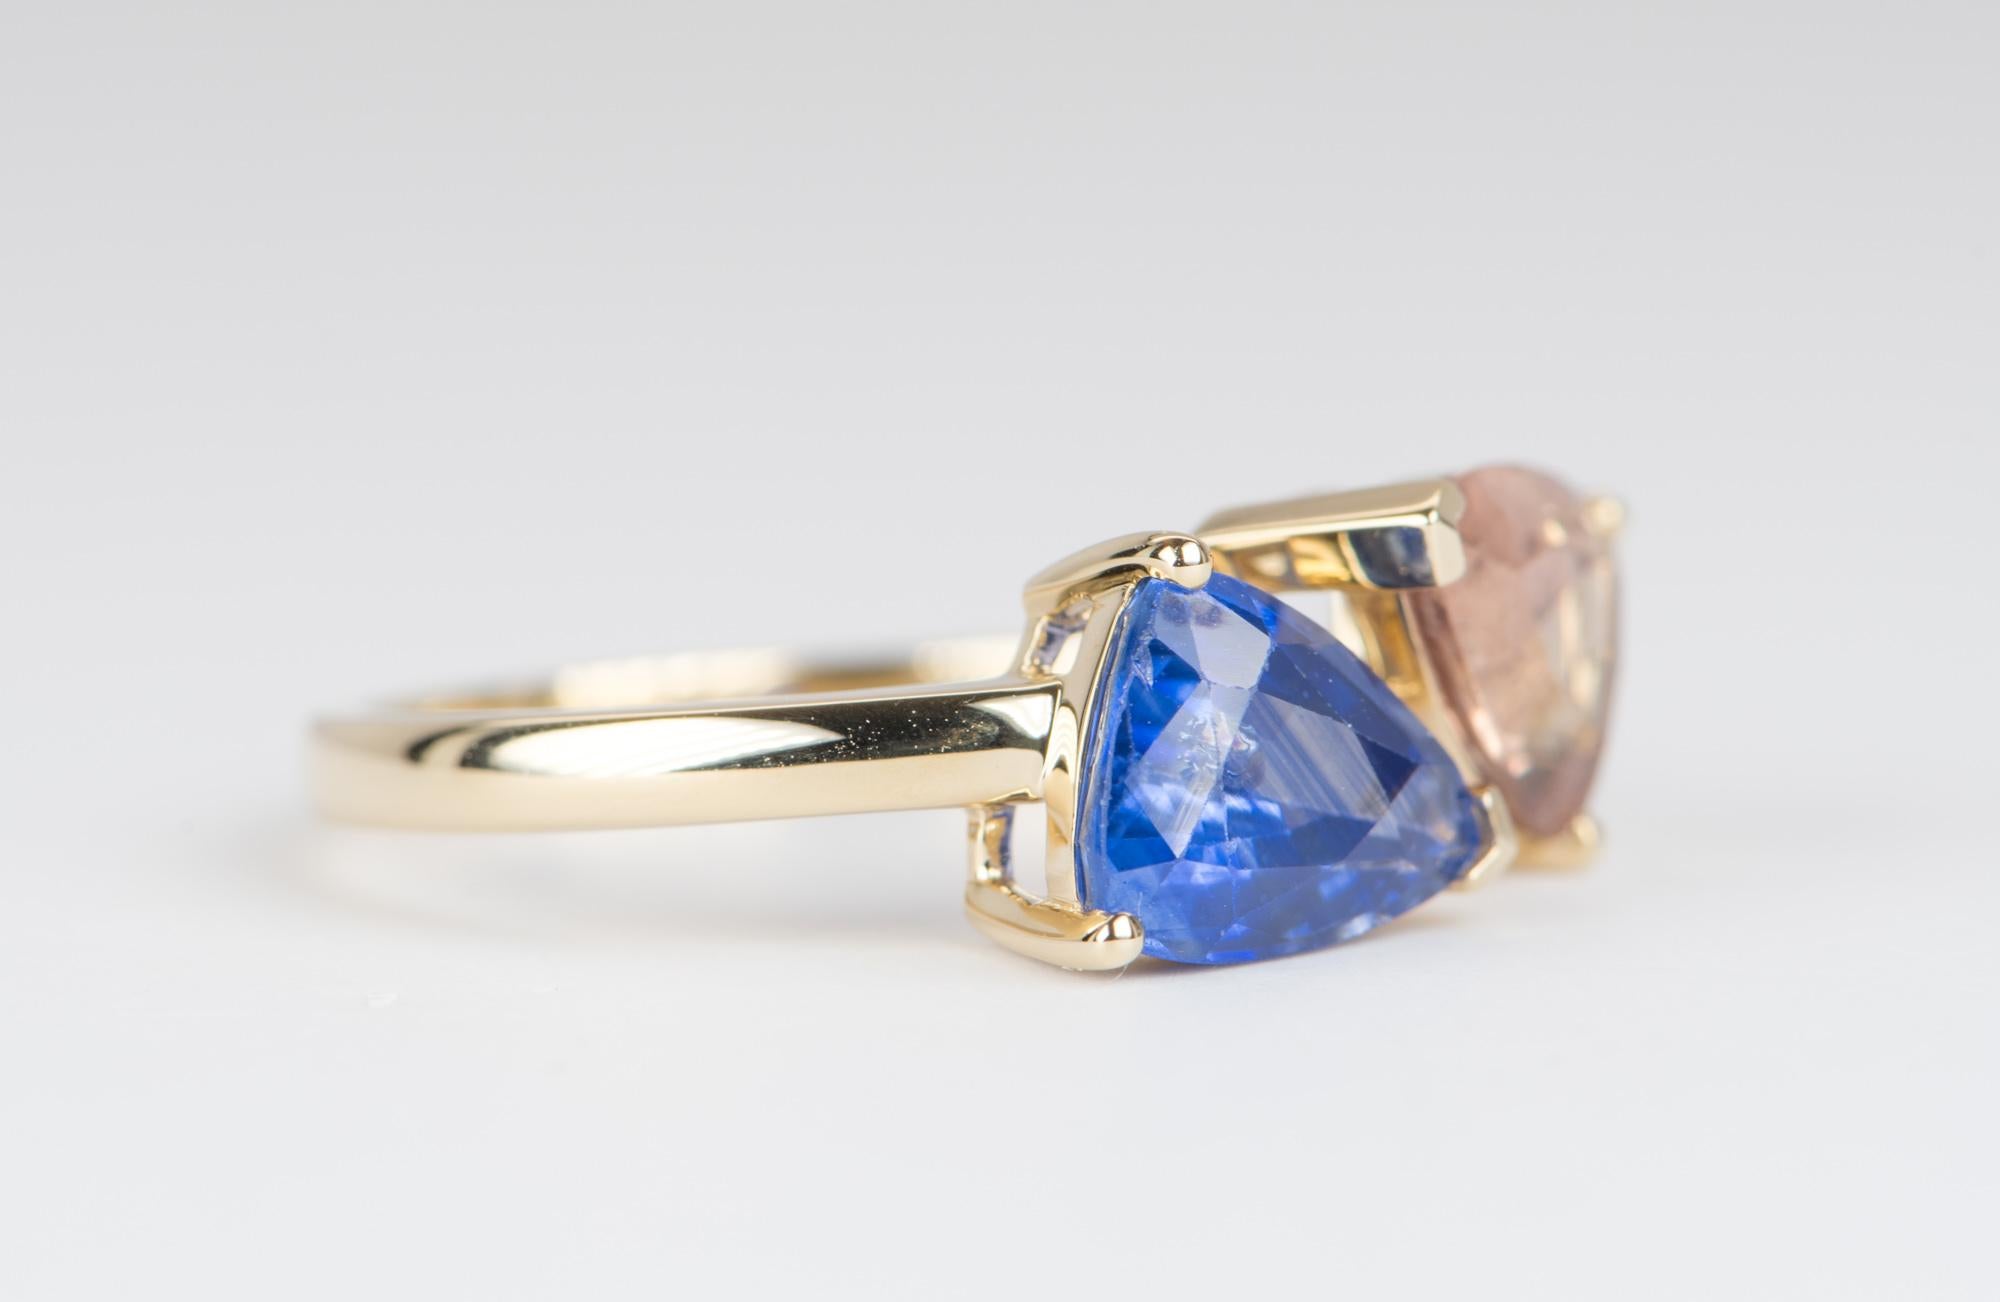 ♥  Solid 14K yellow gold open-end bypass style ring featuring two color contrasting pear-shaped sapphires
♥  Toi et Moi (You and Me) style ring ring can stretch slightly to fit up to size 7.25
♥  Sapphires have visible inclusions, view photos/video